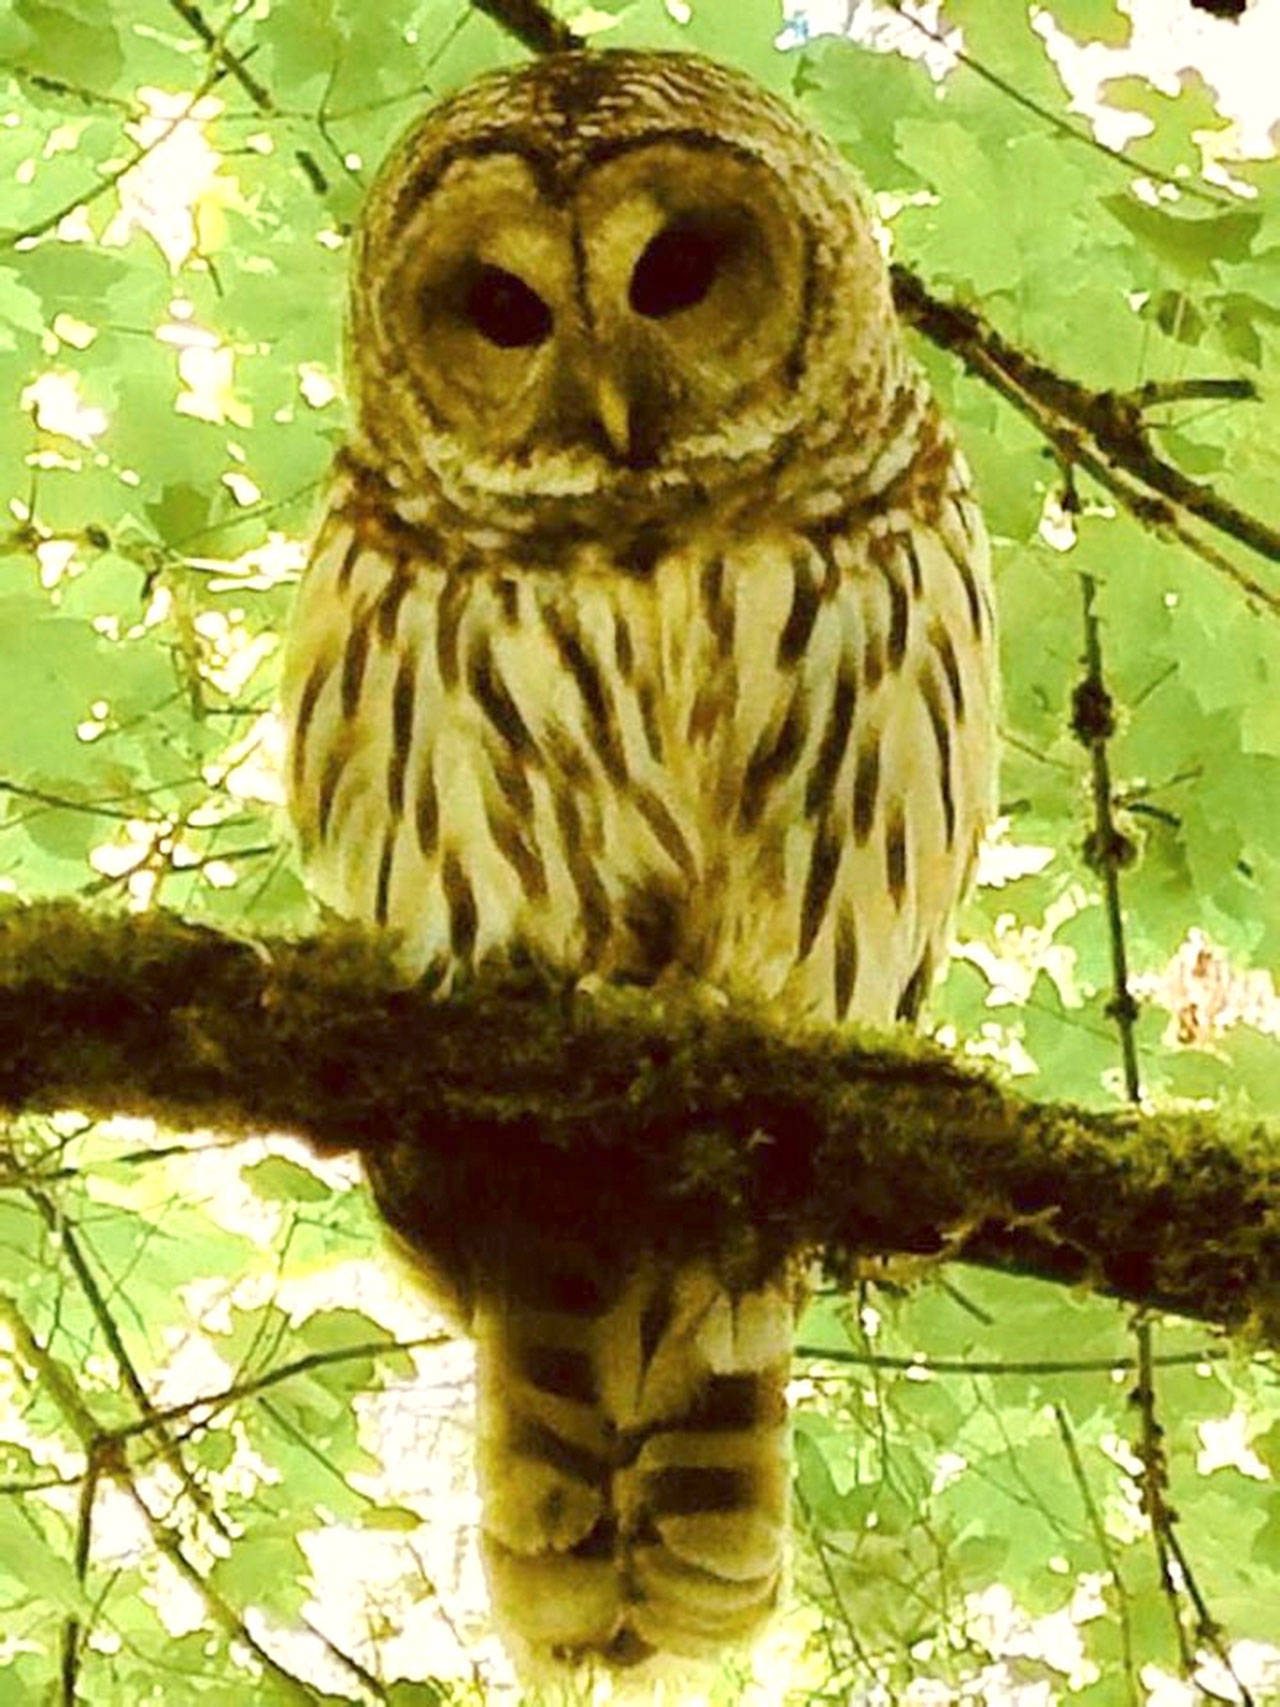 This barred owl has been sighted repeatedly in Pioneer Park. Photo courtesy of city of Mercer Island